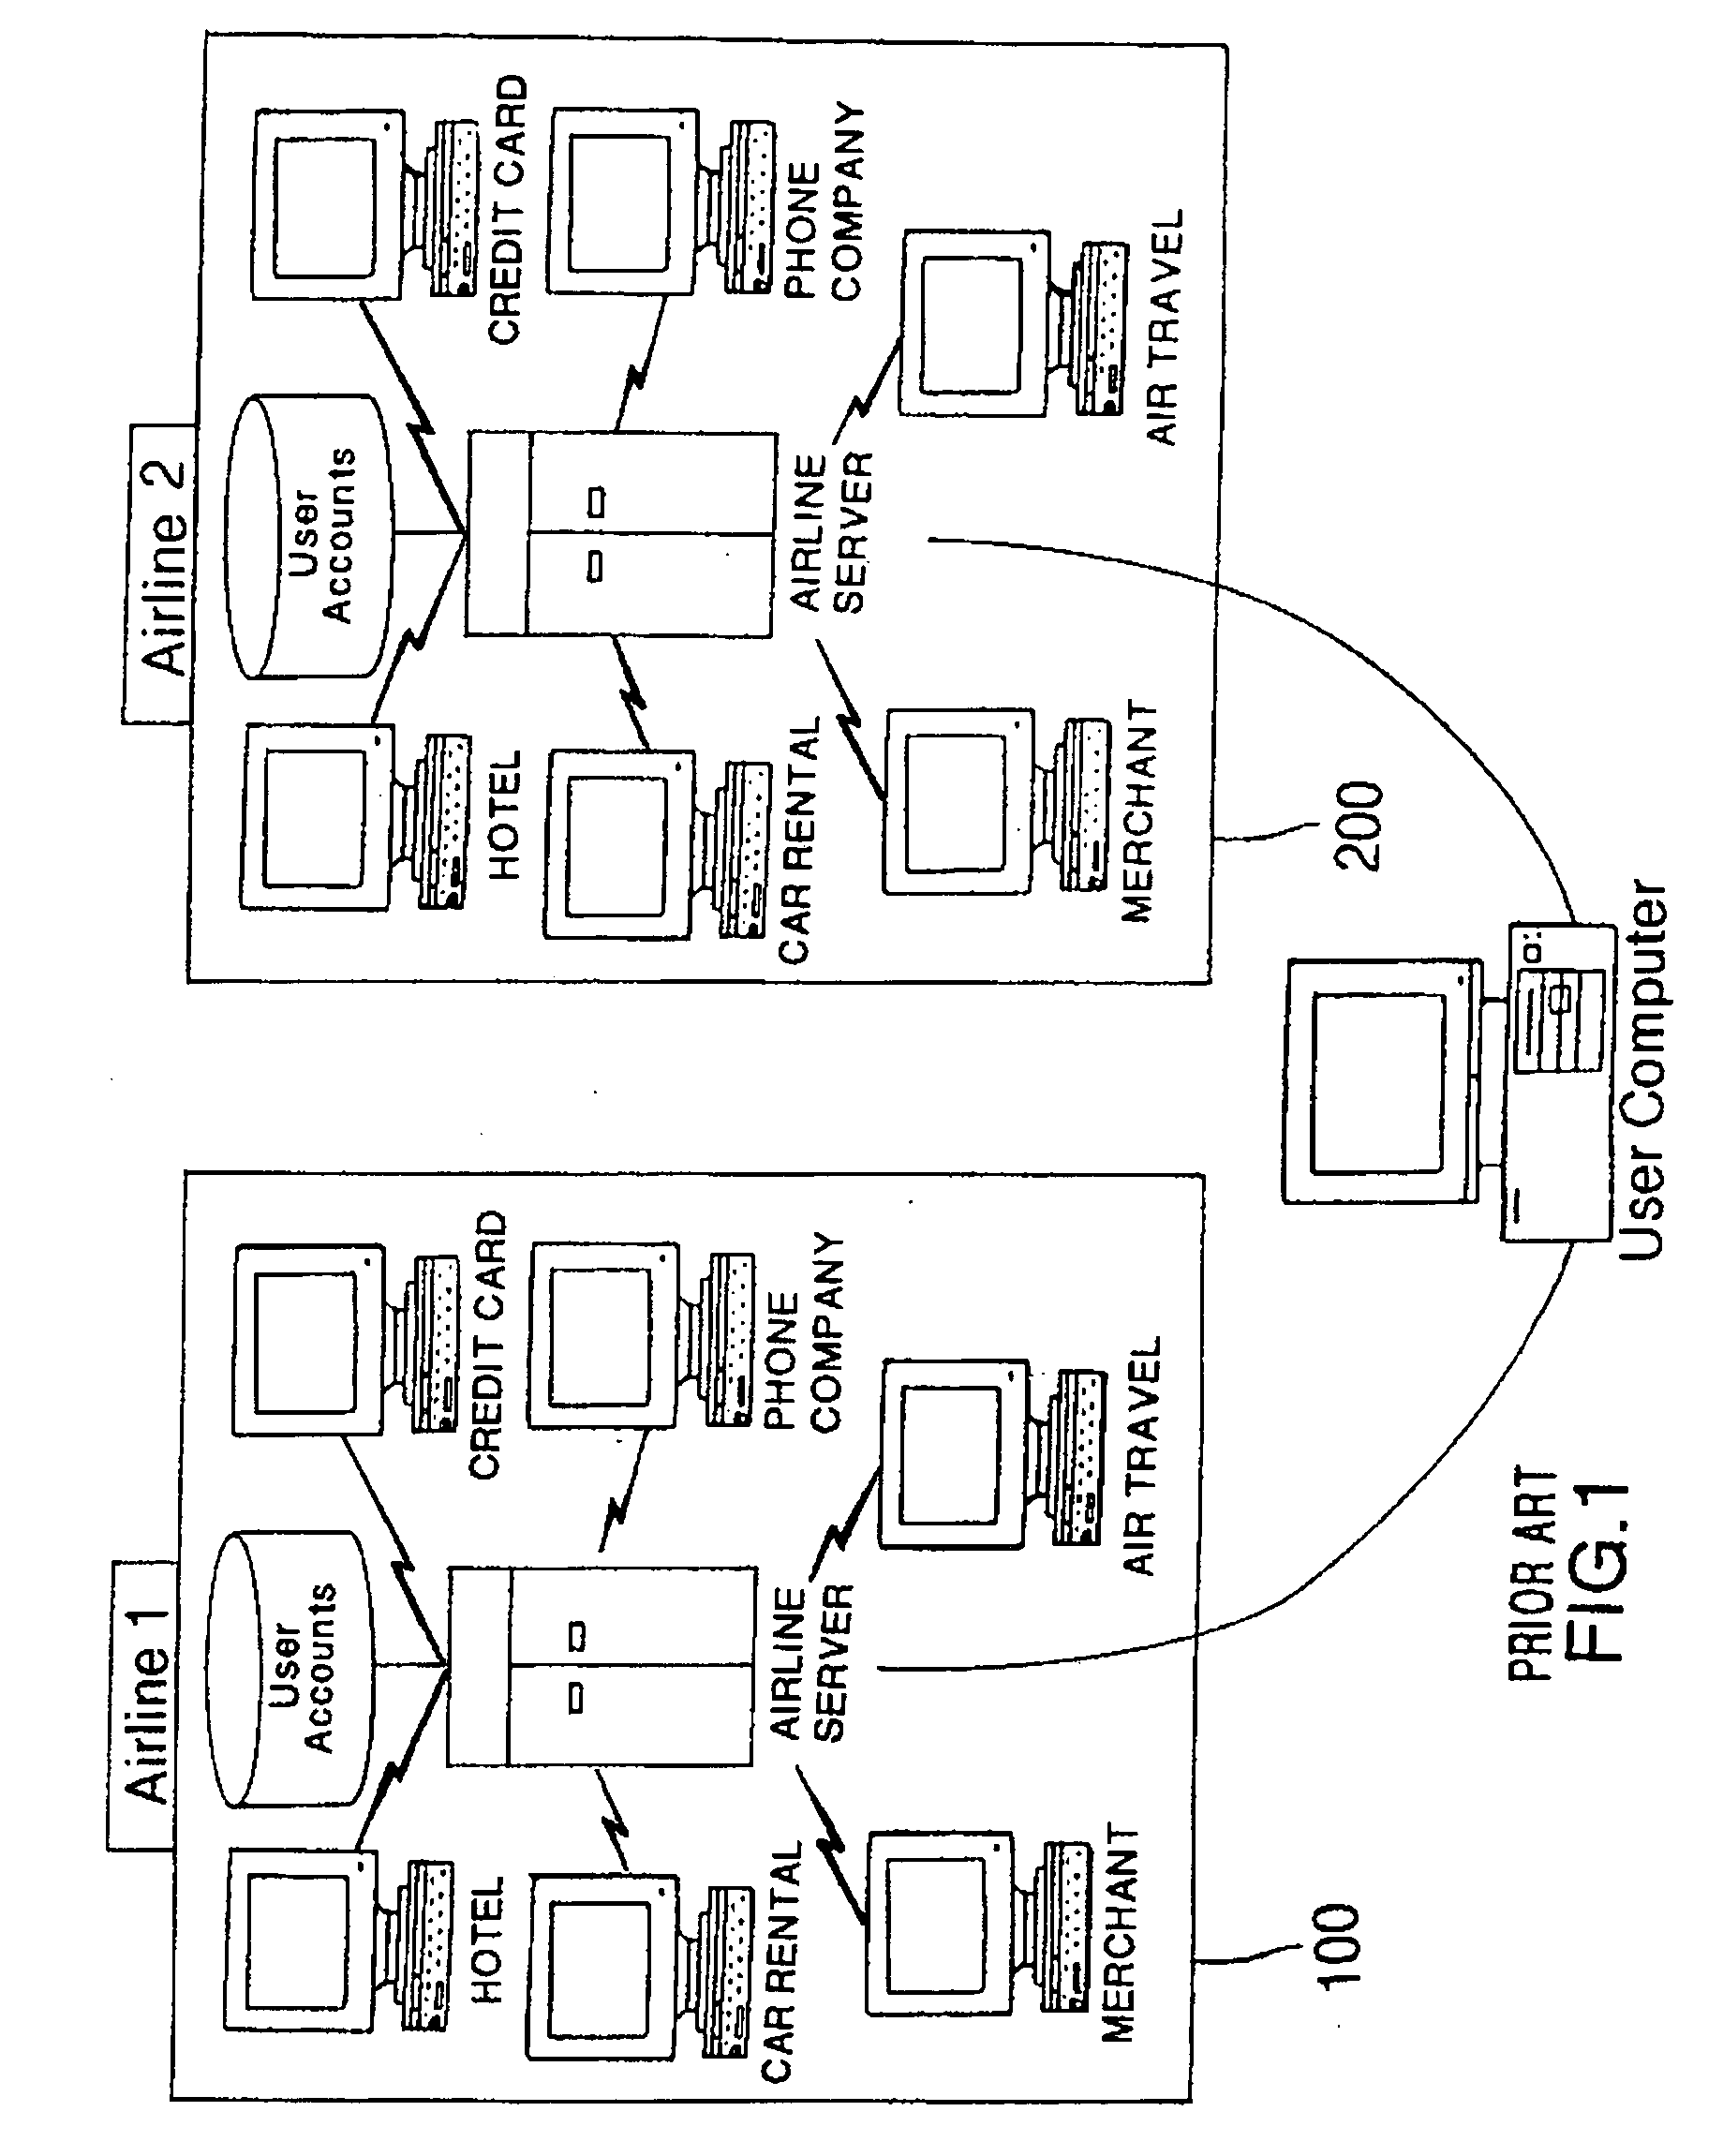 Method and system for implementing a search engine with reward components and payment components